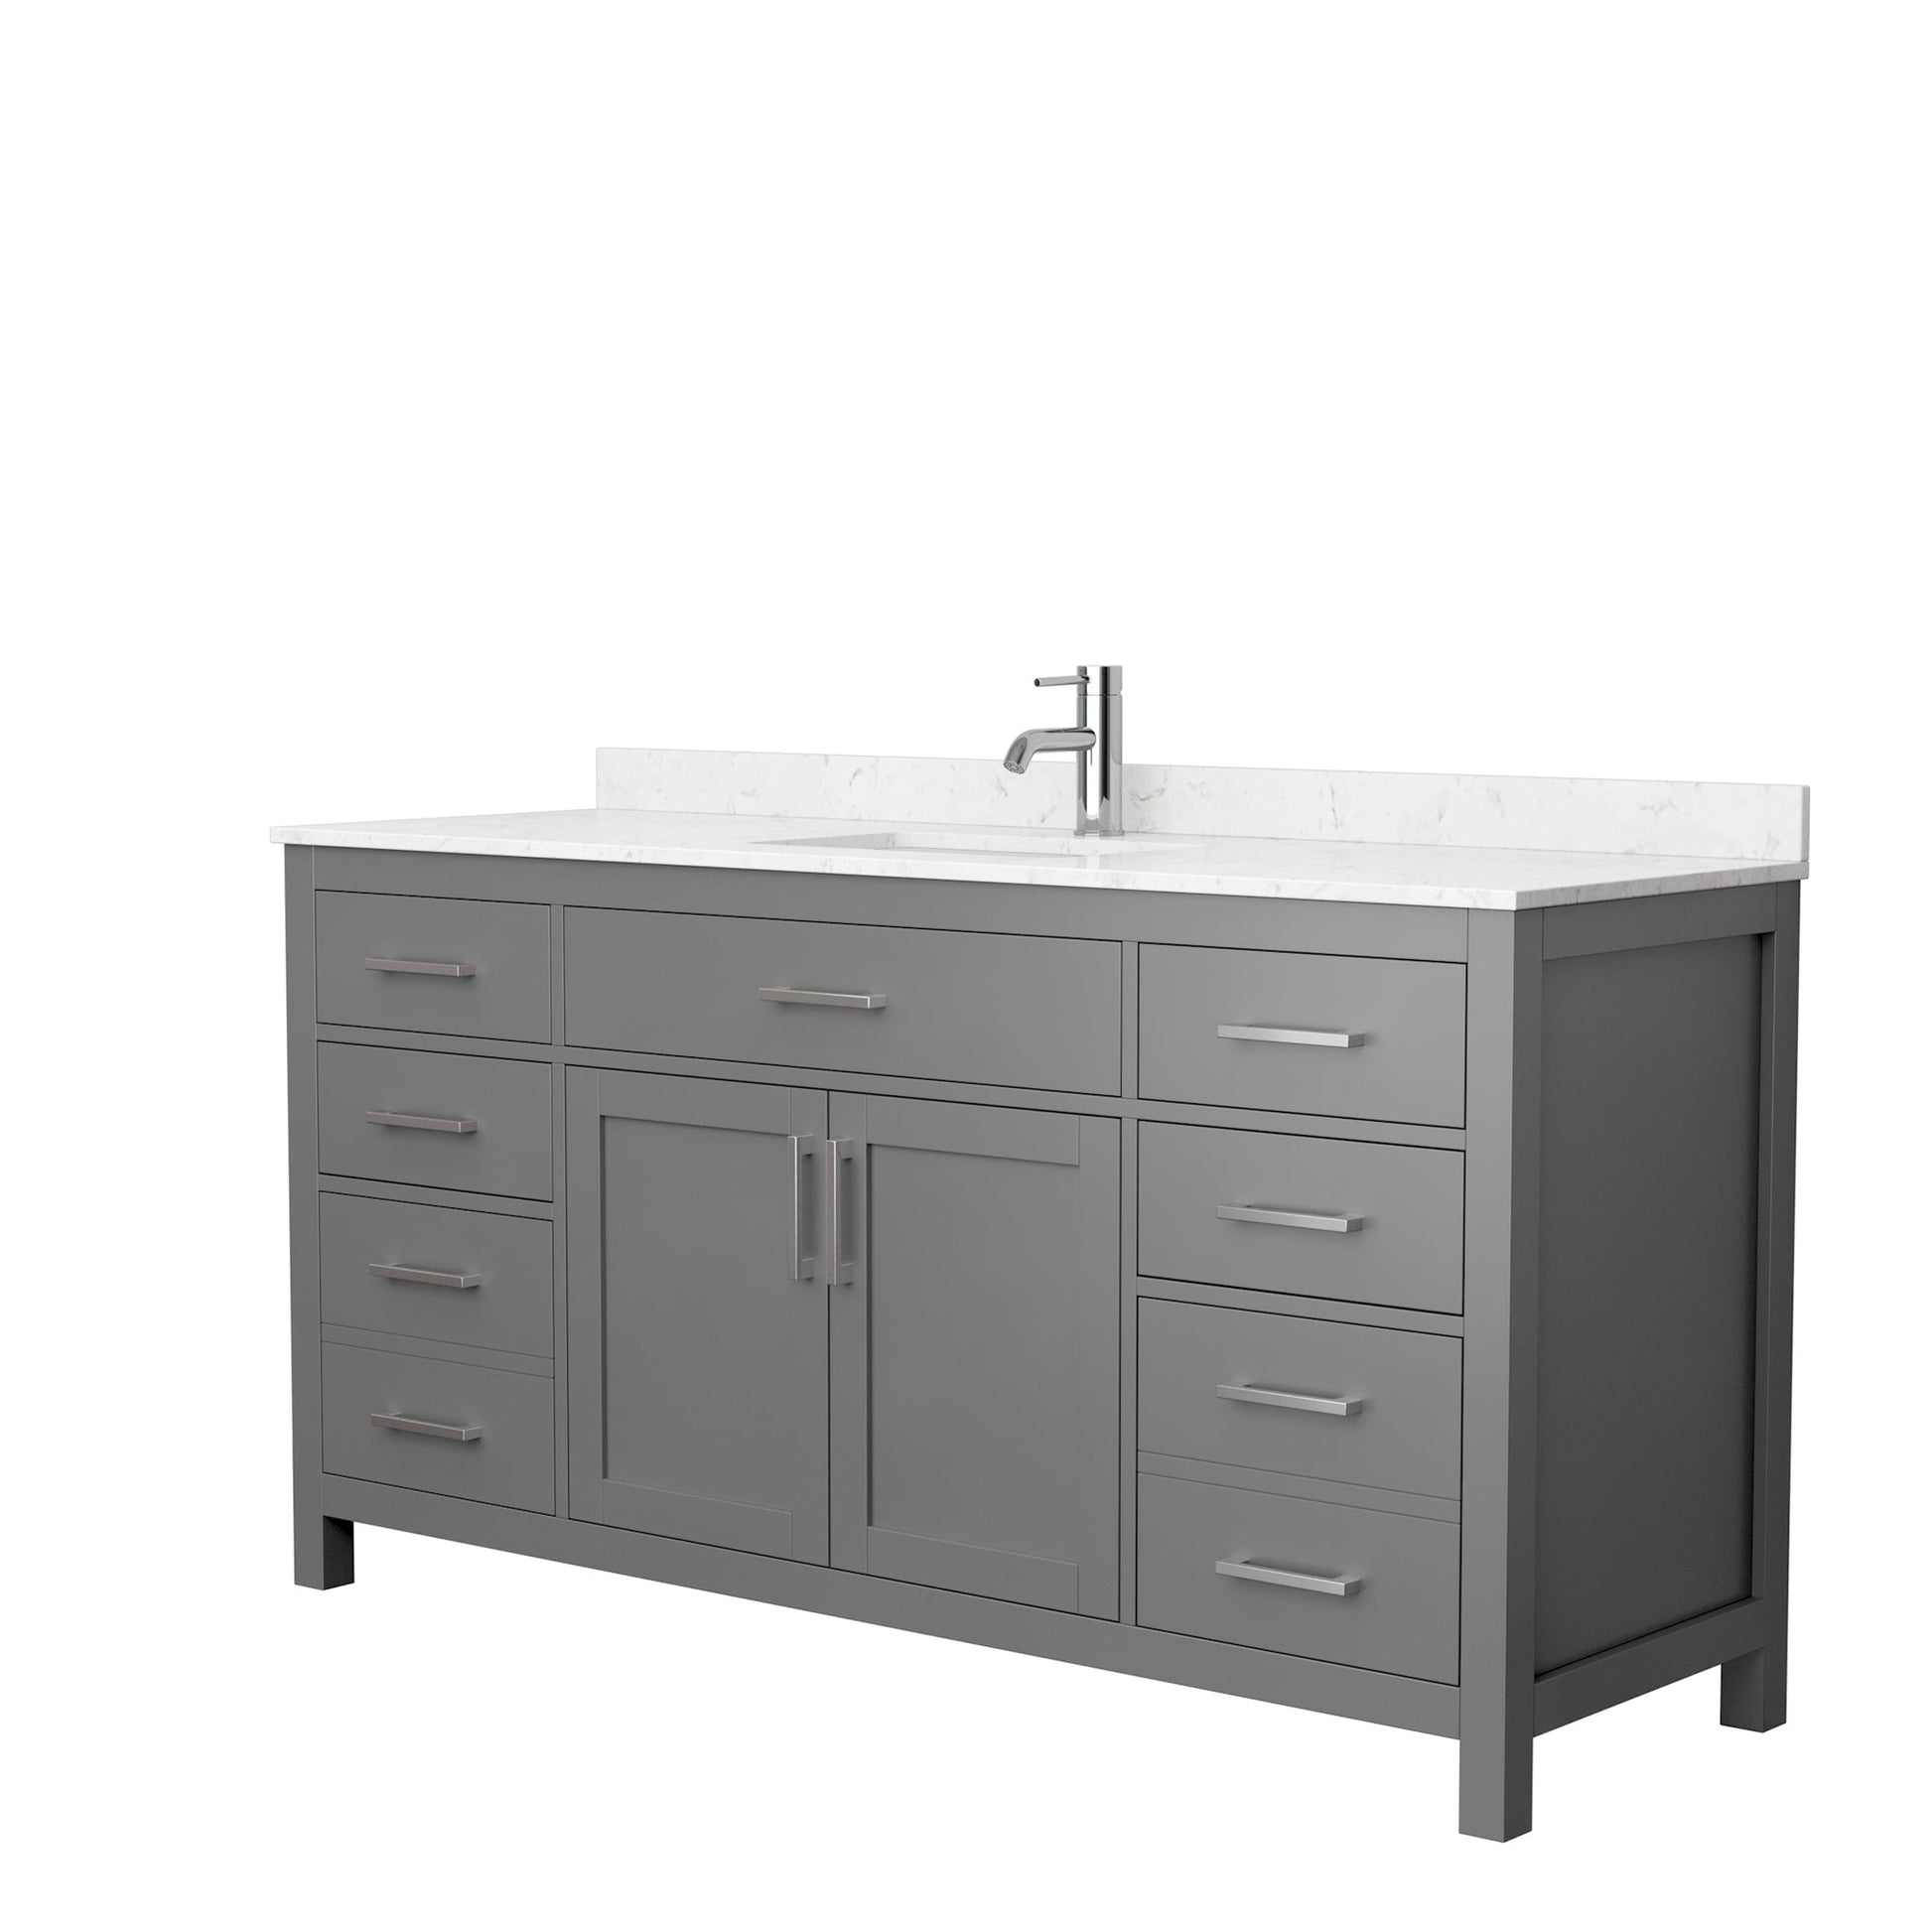 Wyndham Collection Beckett 66" Single Bathroom Dark Gray Vanity With White Carrara Cultured Marble Countertop, Undermount Square Sink And Brushed Nickel Trim